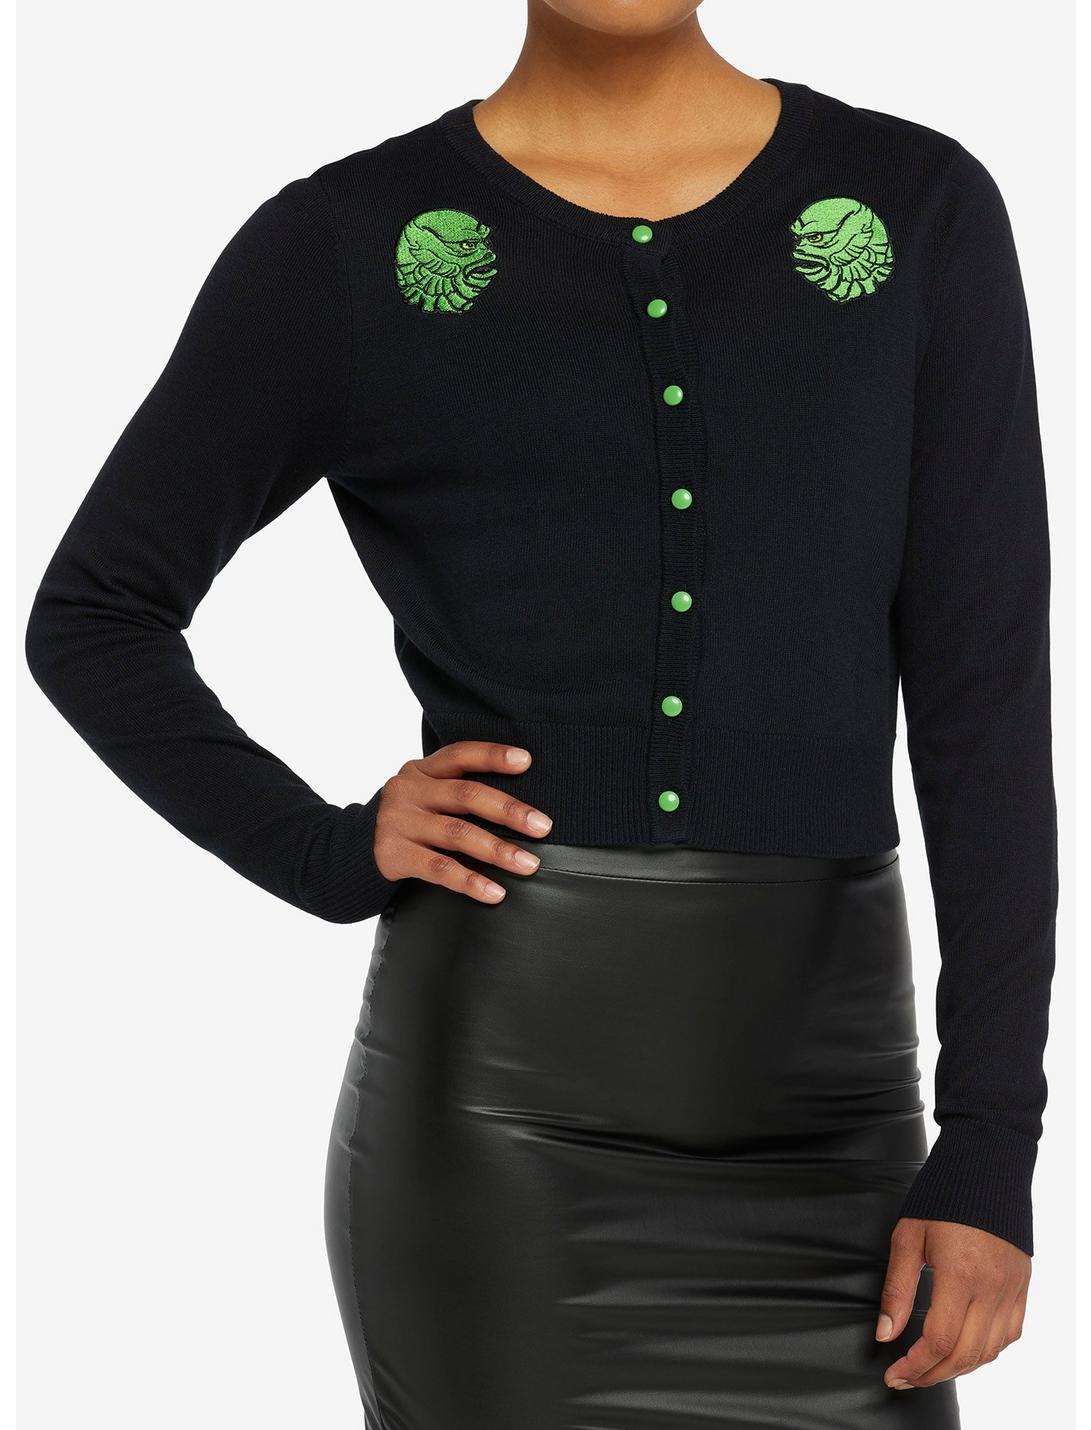 Universal Monsters Creature From The Black Lagoon Cardigan, BLACK  GREEN, hi-res